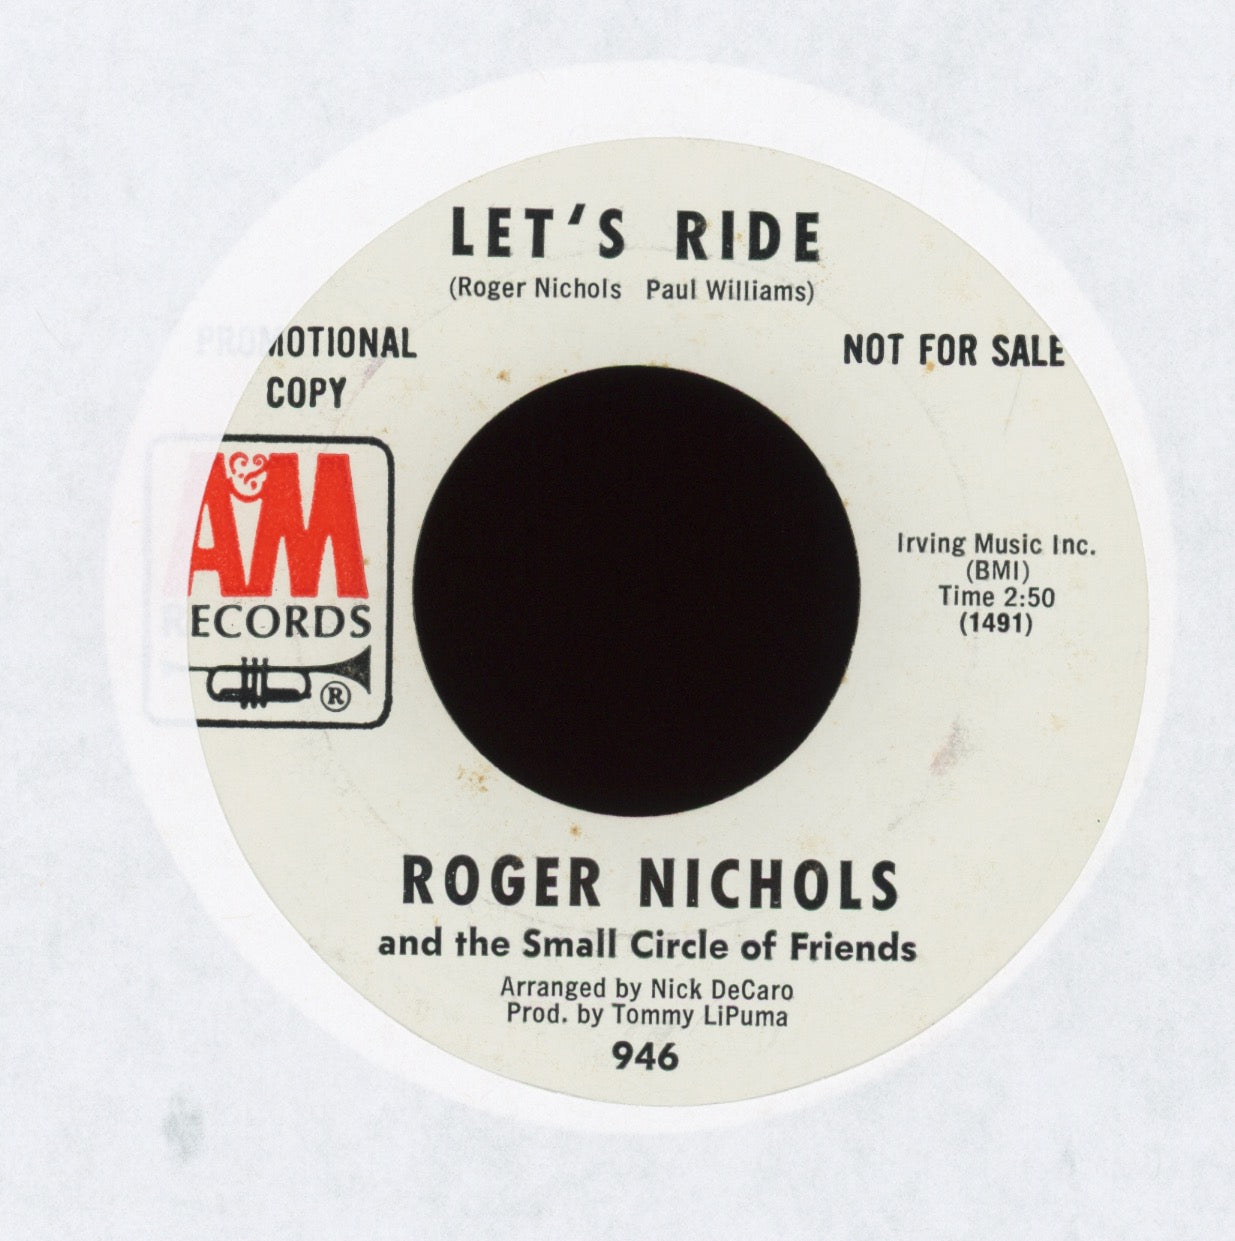 Roger Nichols & The Small Circle Of Friends - Let's Ride on A&M Promo Sunshine Pop 45